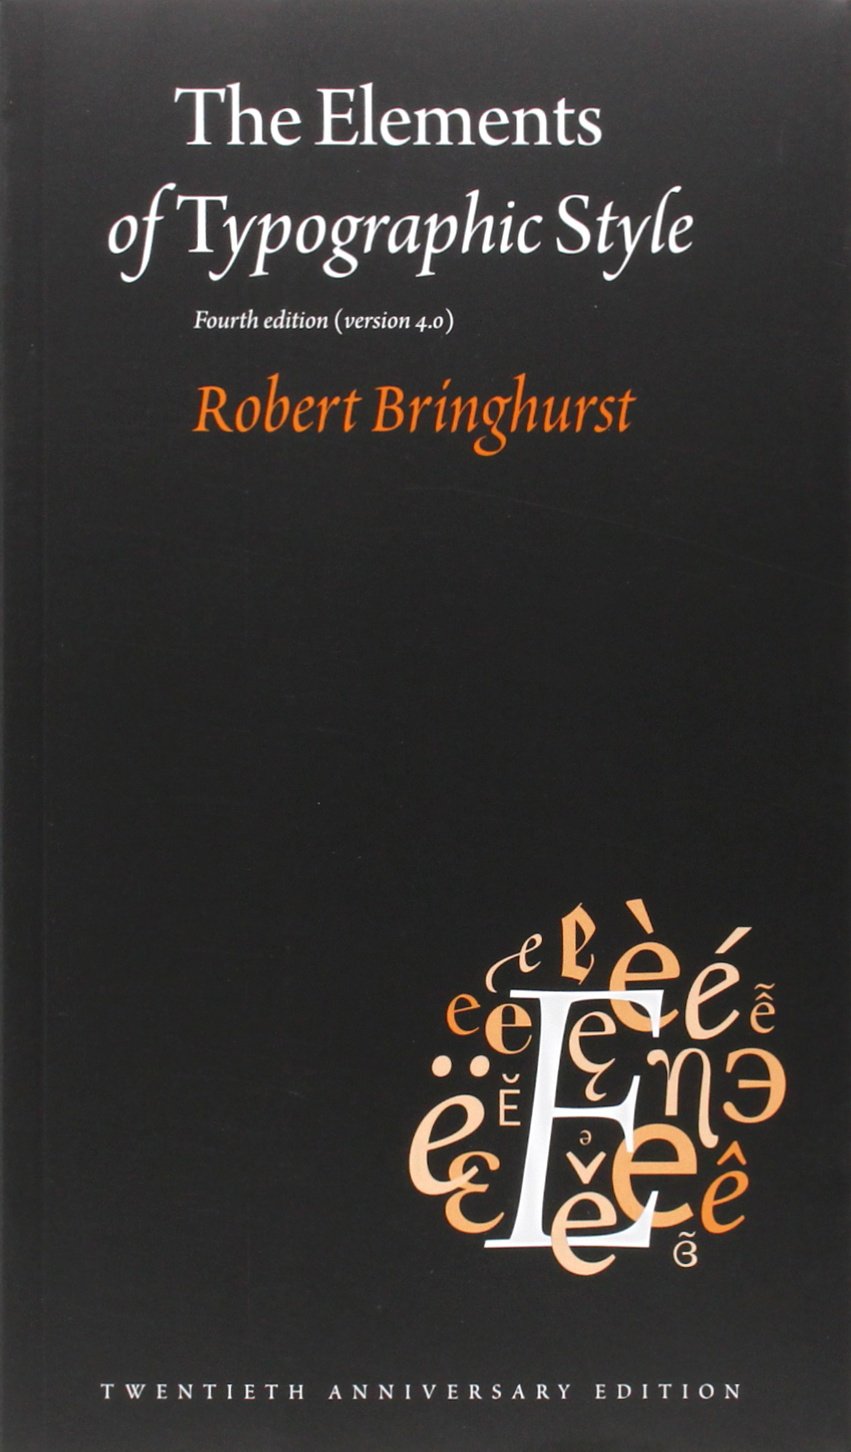 Elements of Typographic Style by Robert Bringhurst